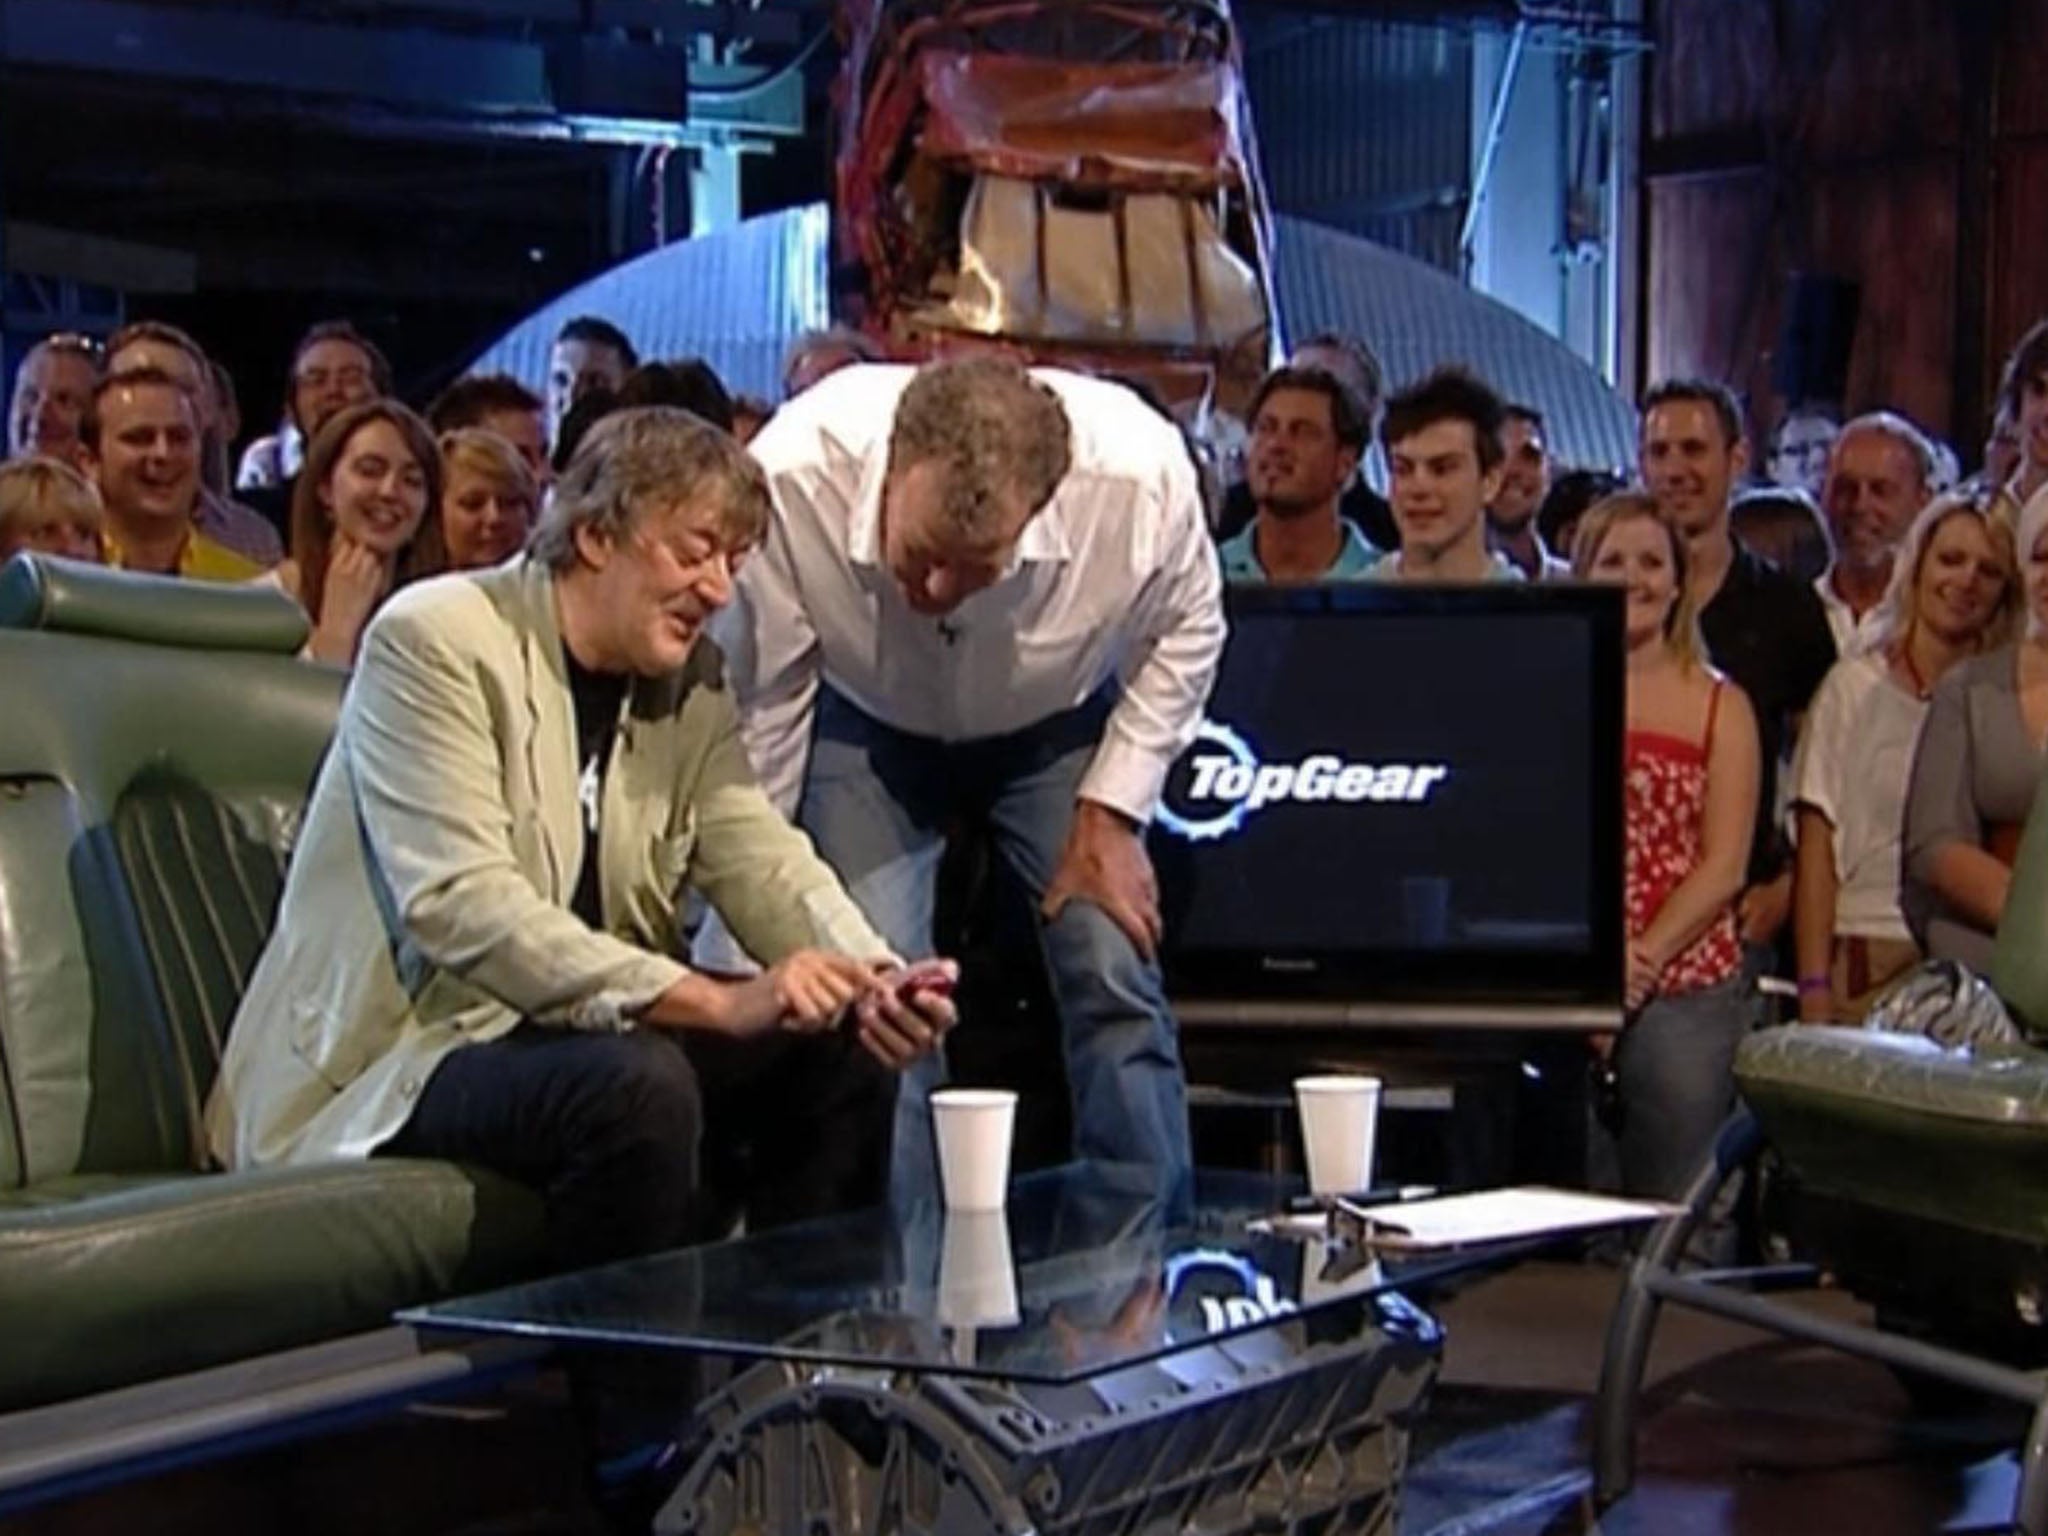 15. Stephen Fry introduces Grindr on Top Gear (2009)